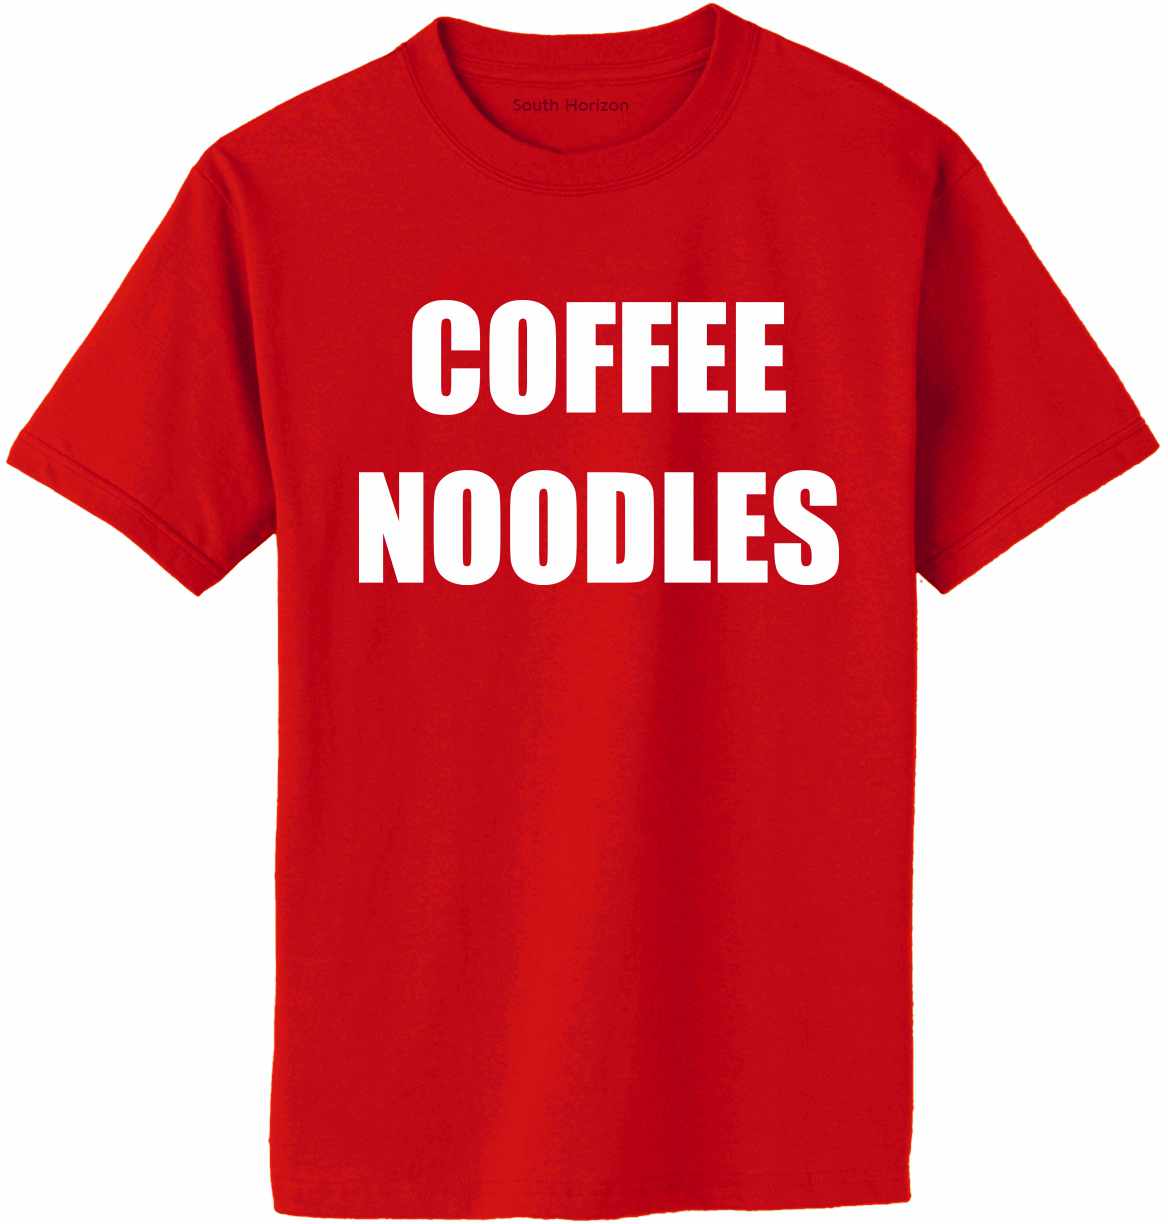 COFFEE NOODLES on Adult T-Shirt